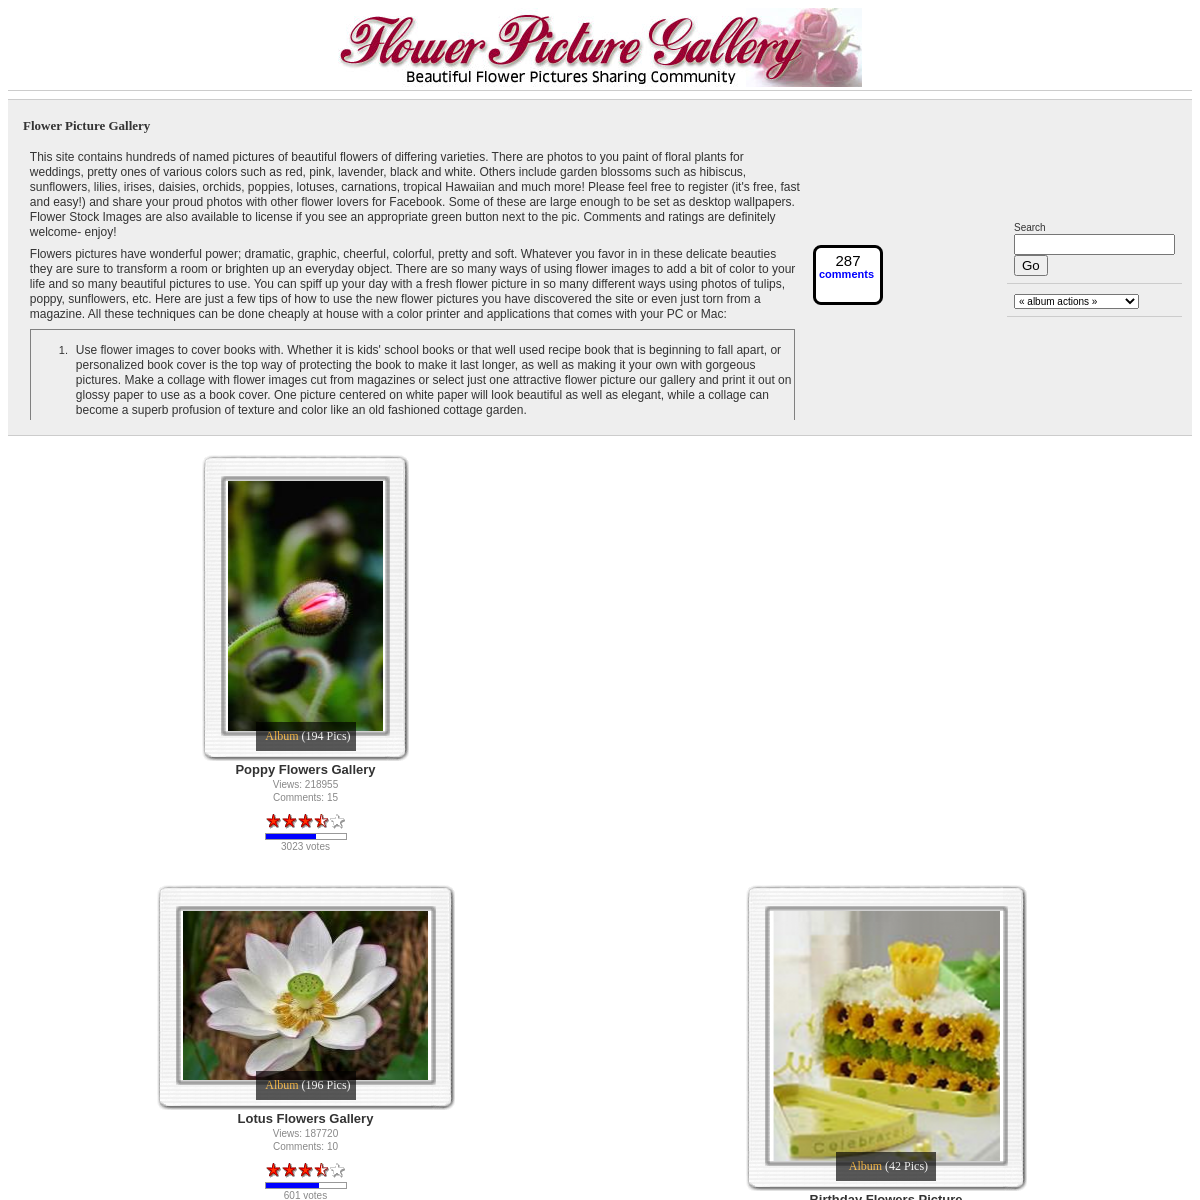 A complete backup of flowerpicturegallery.com